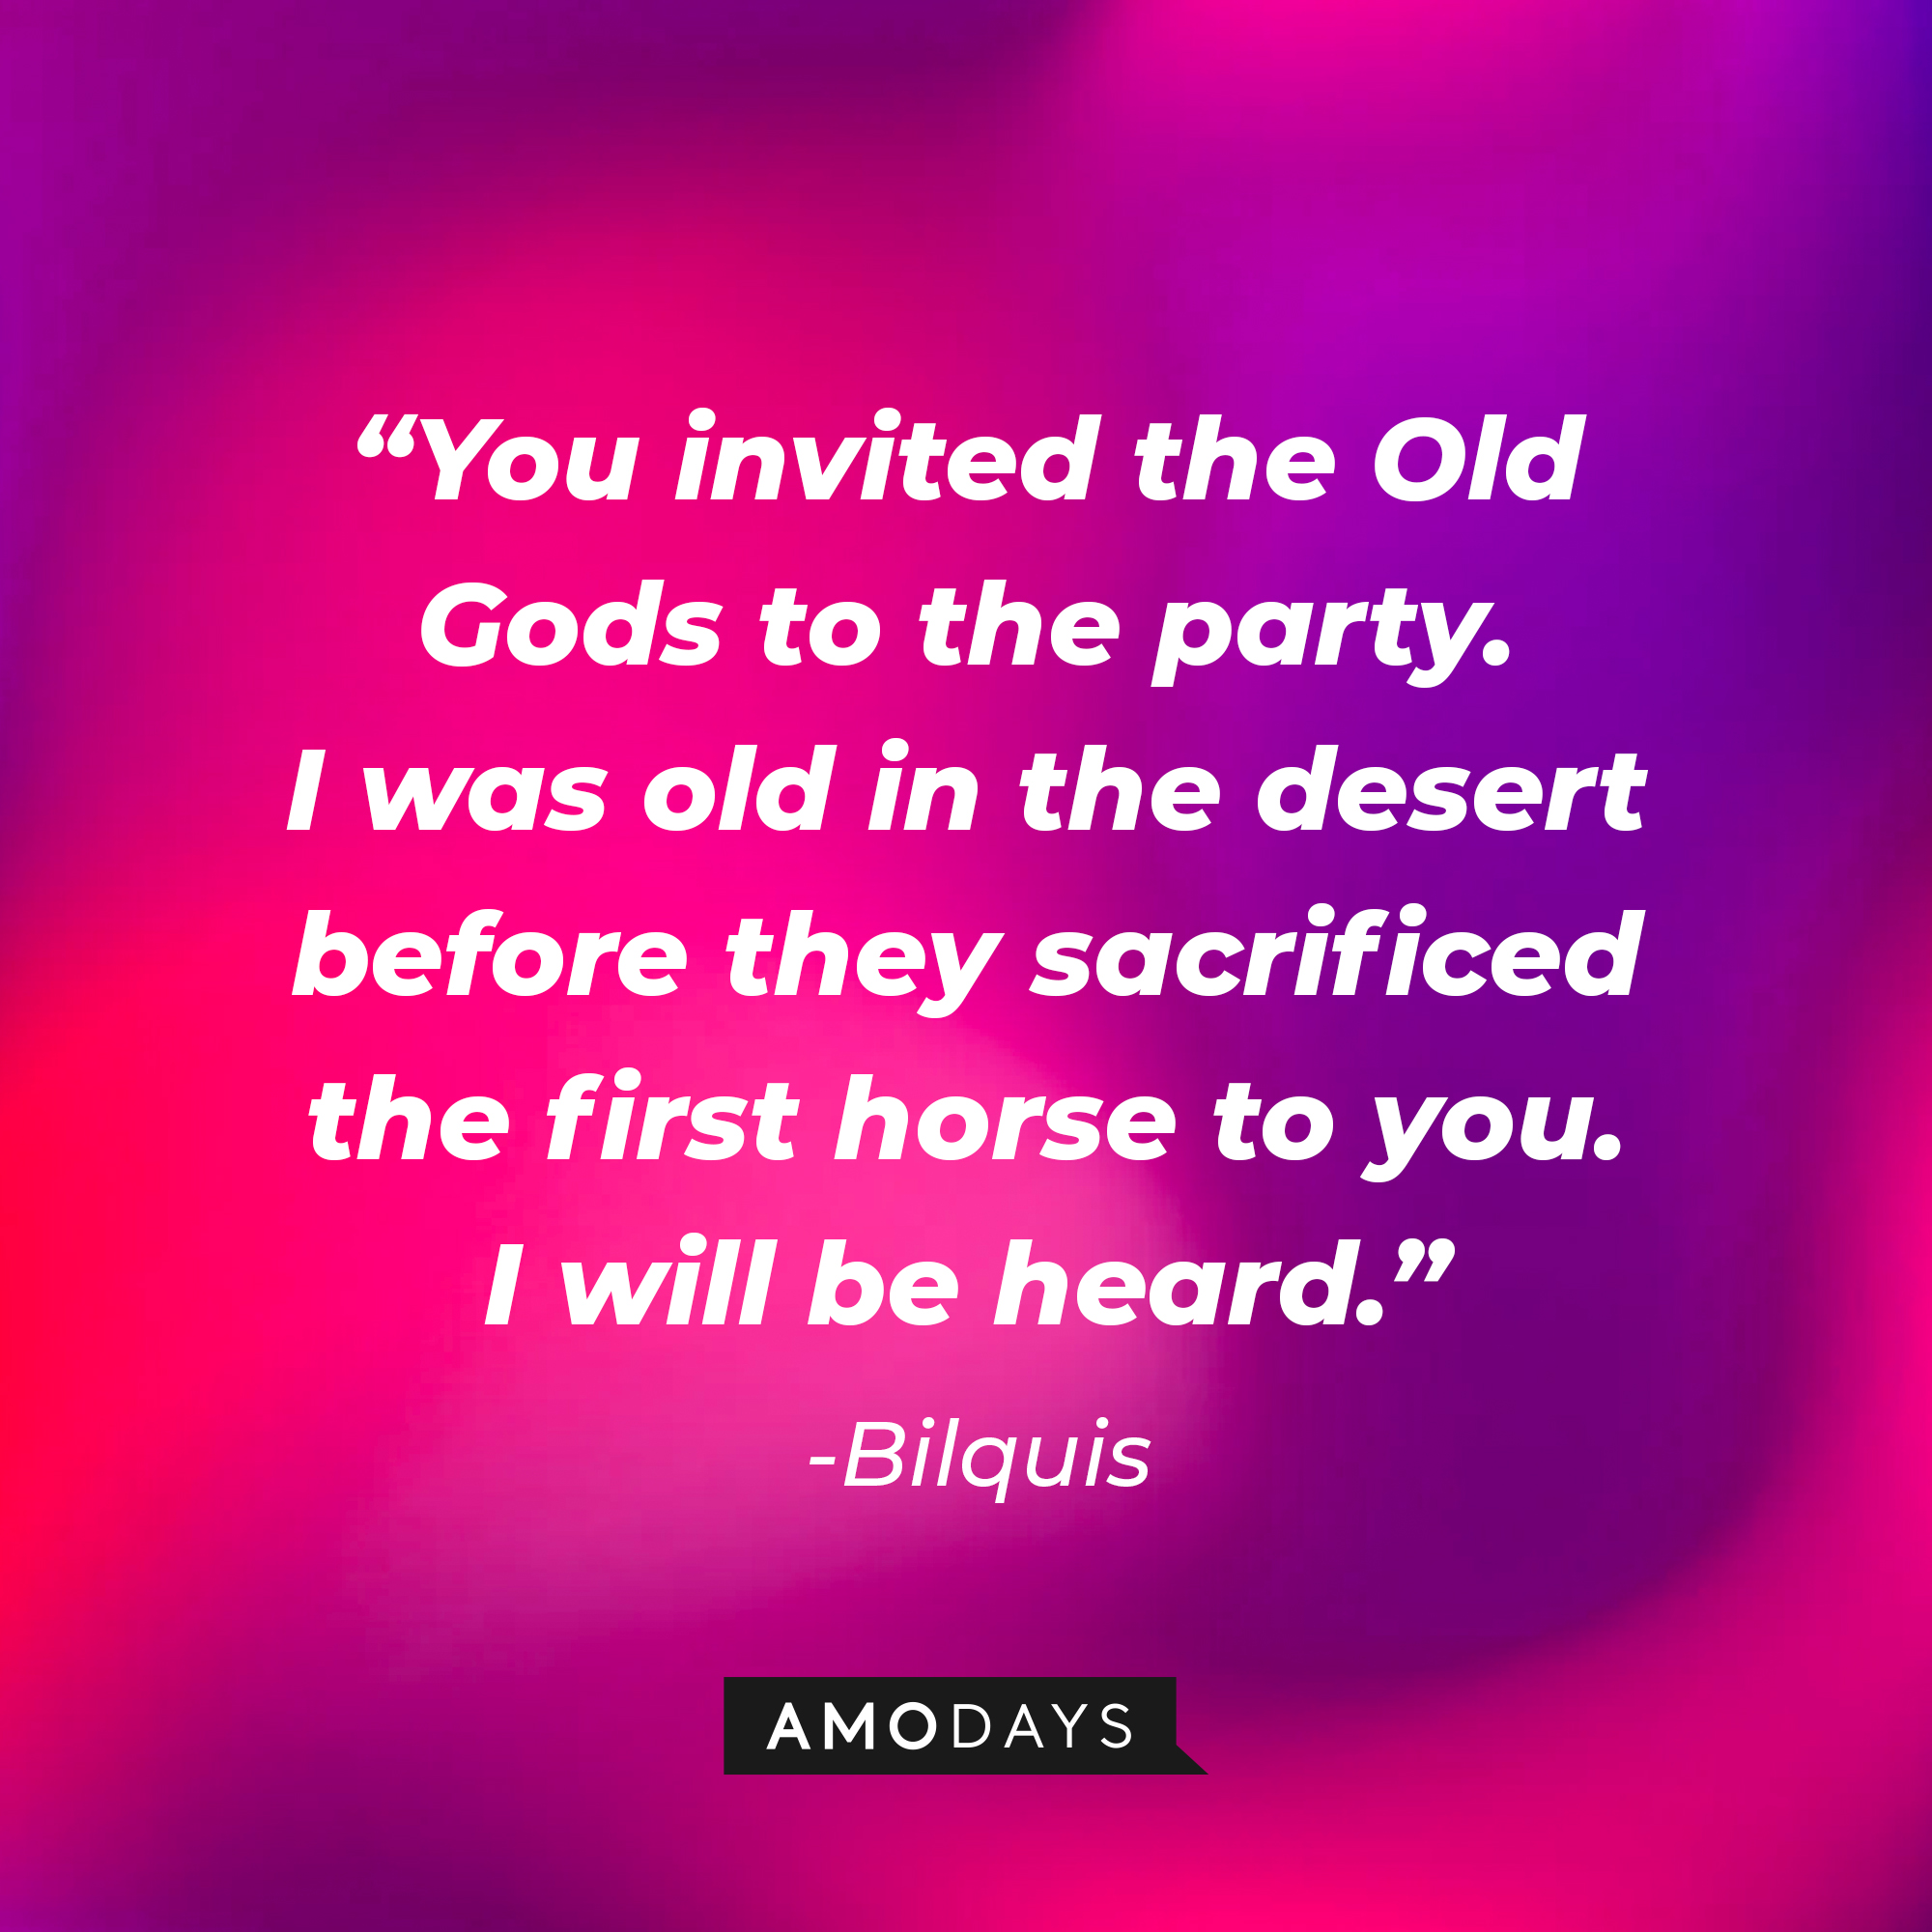 Bilquis' quote: "You invited the Old Gods to the party. I was old in the desert before they sacrificed the first horse to you. I will be heard." | Source: Amodays